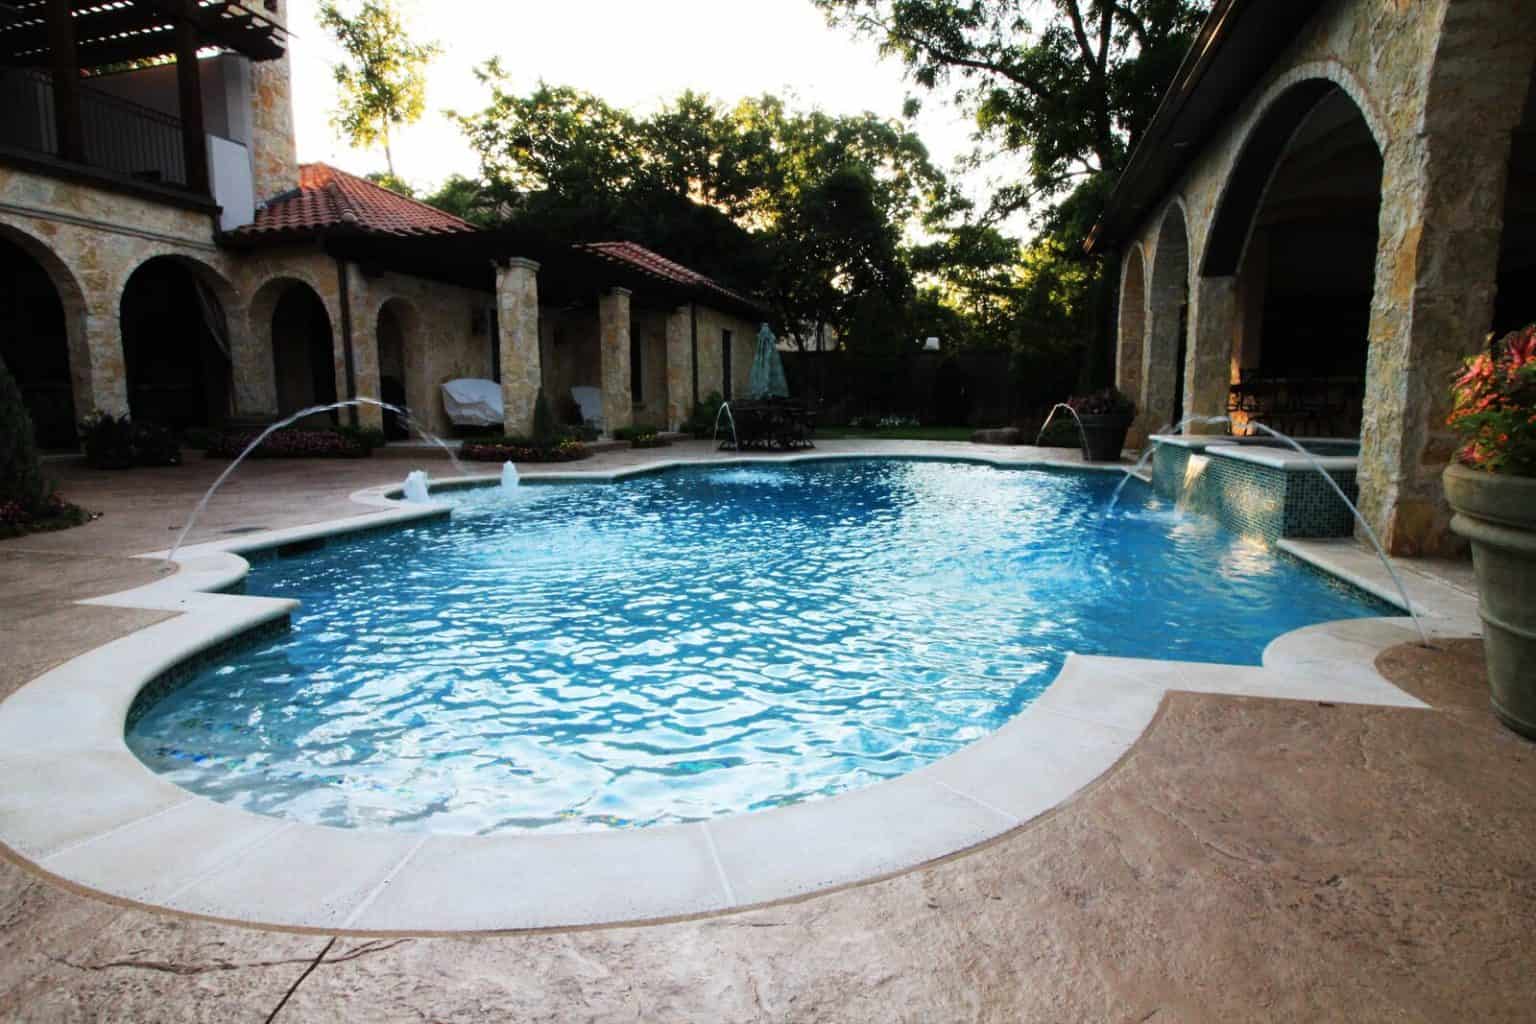 A raised overflowing spa, deck jets and tanning ledge bubblers. Water Features are fun accents that add to any pool design. By adding pool automation, you can control these effects from a handheld remote or smart phone device. The swimming pool industry is adding new features like these all the time and we are at the forefront of leading innovations.